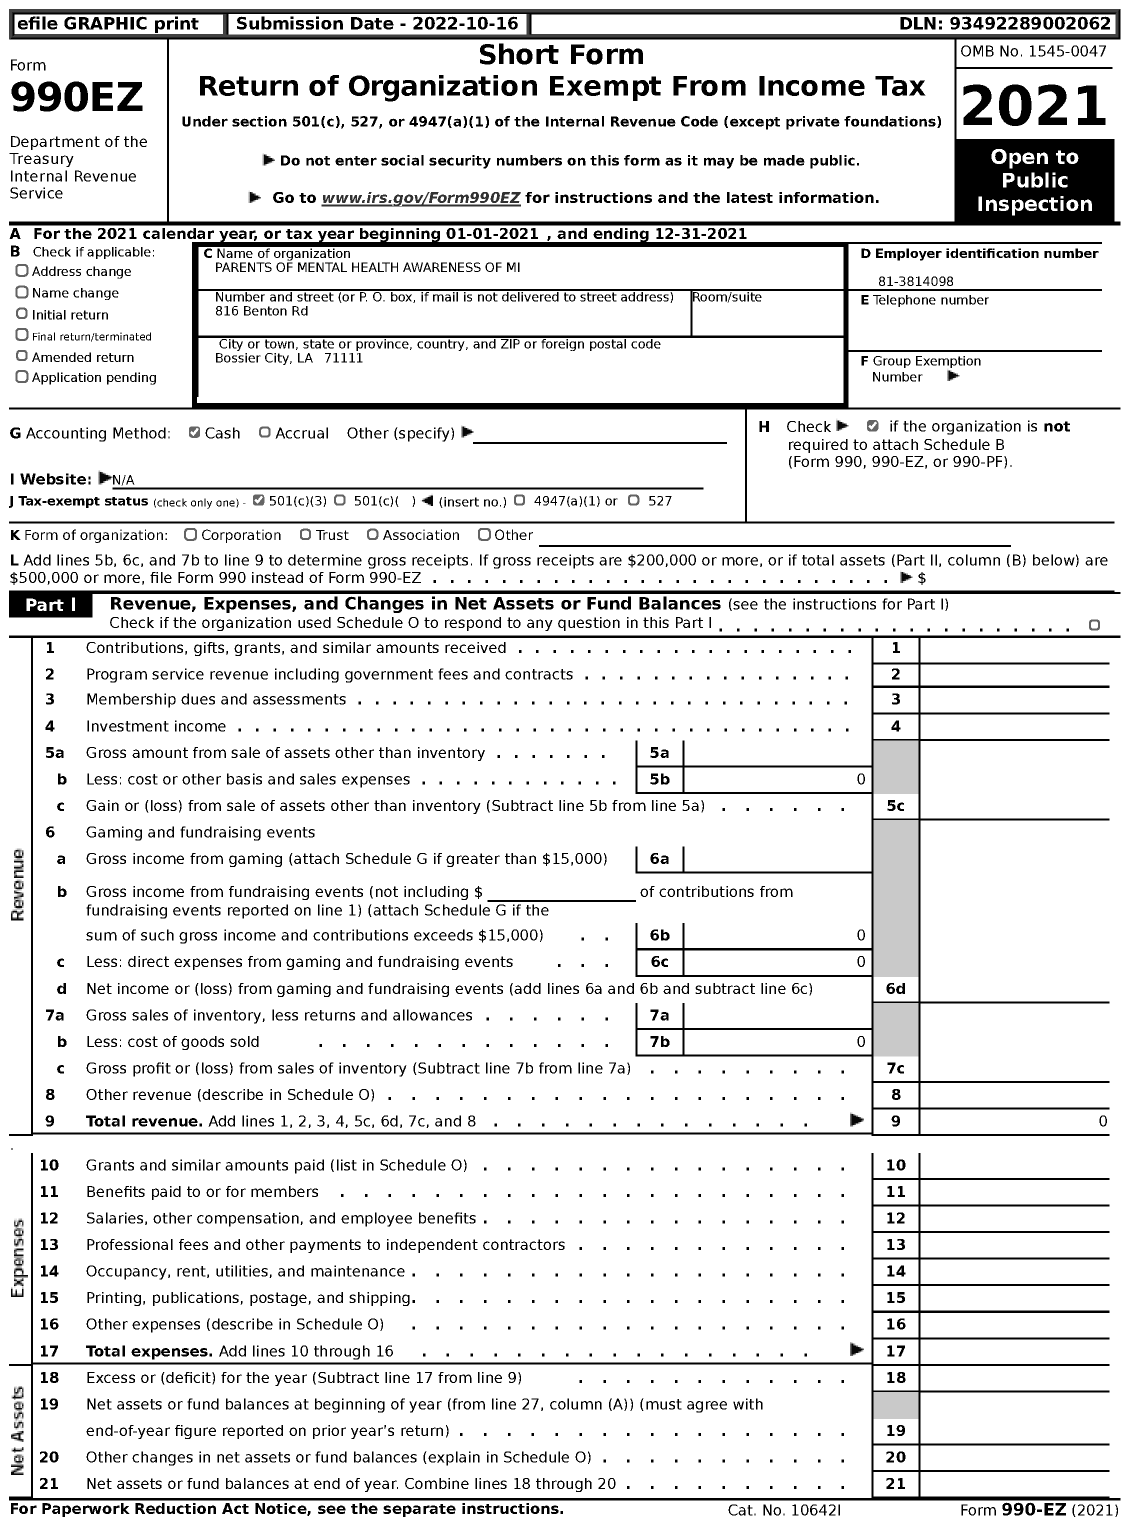 Image of first page of 2021 Form 990EZ for Parents of Mental Health Awareness of Mi